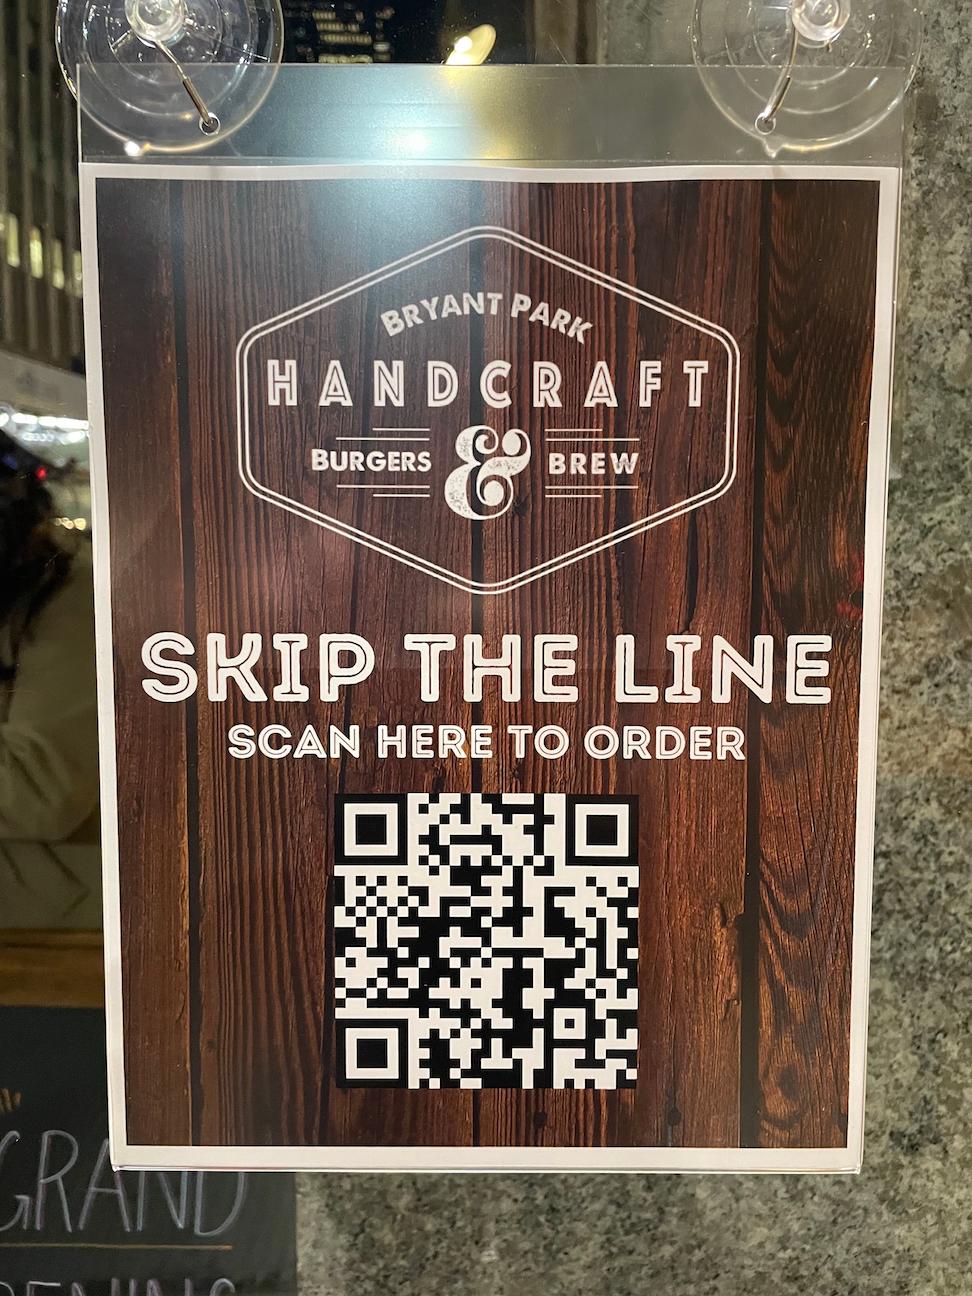 Skip the line - order ahead on your phone!